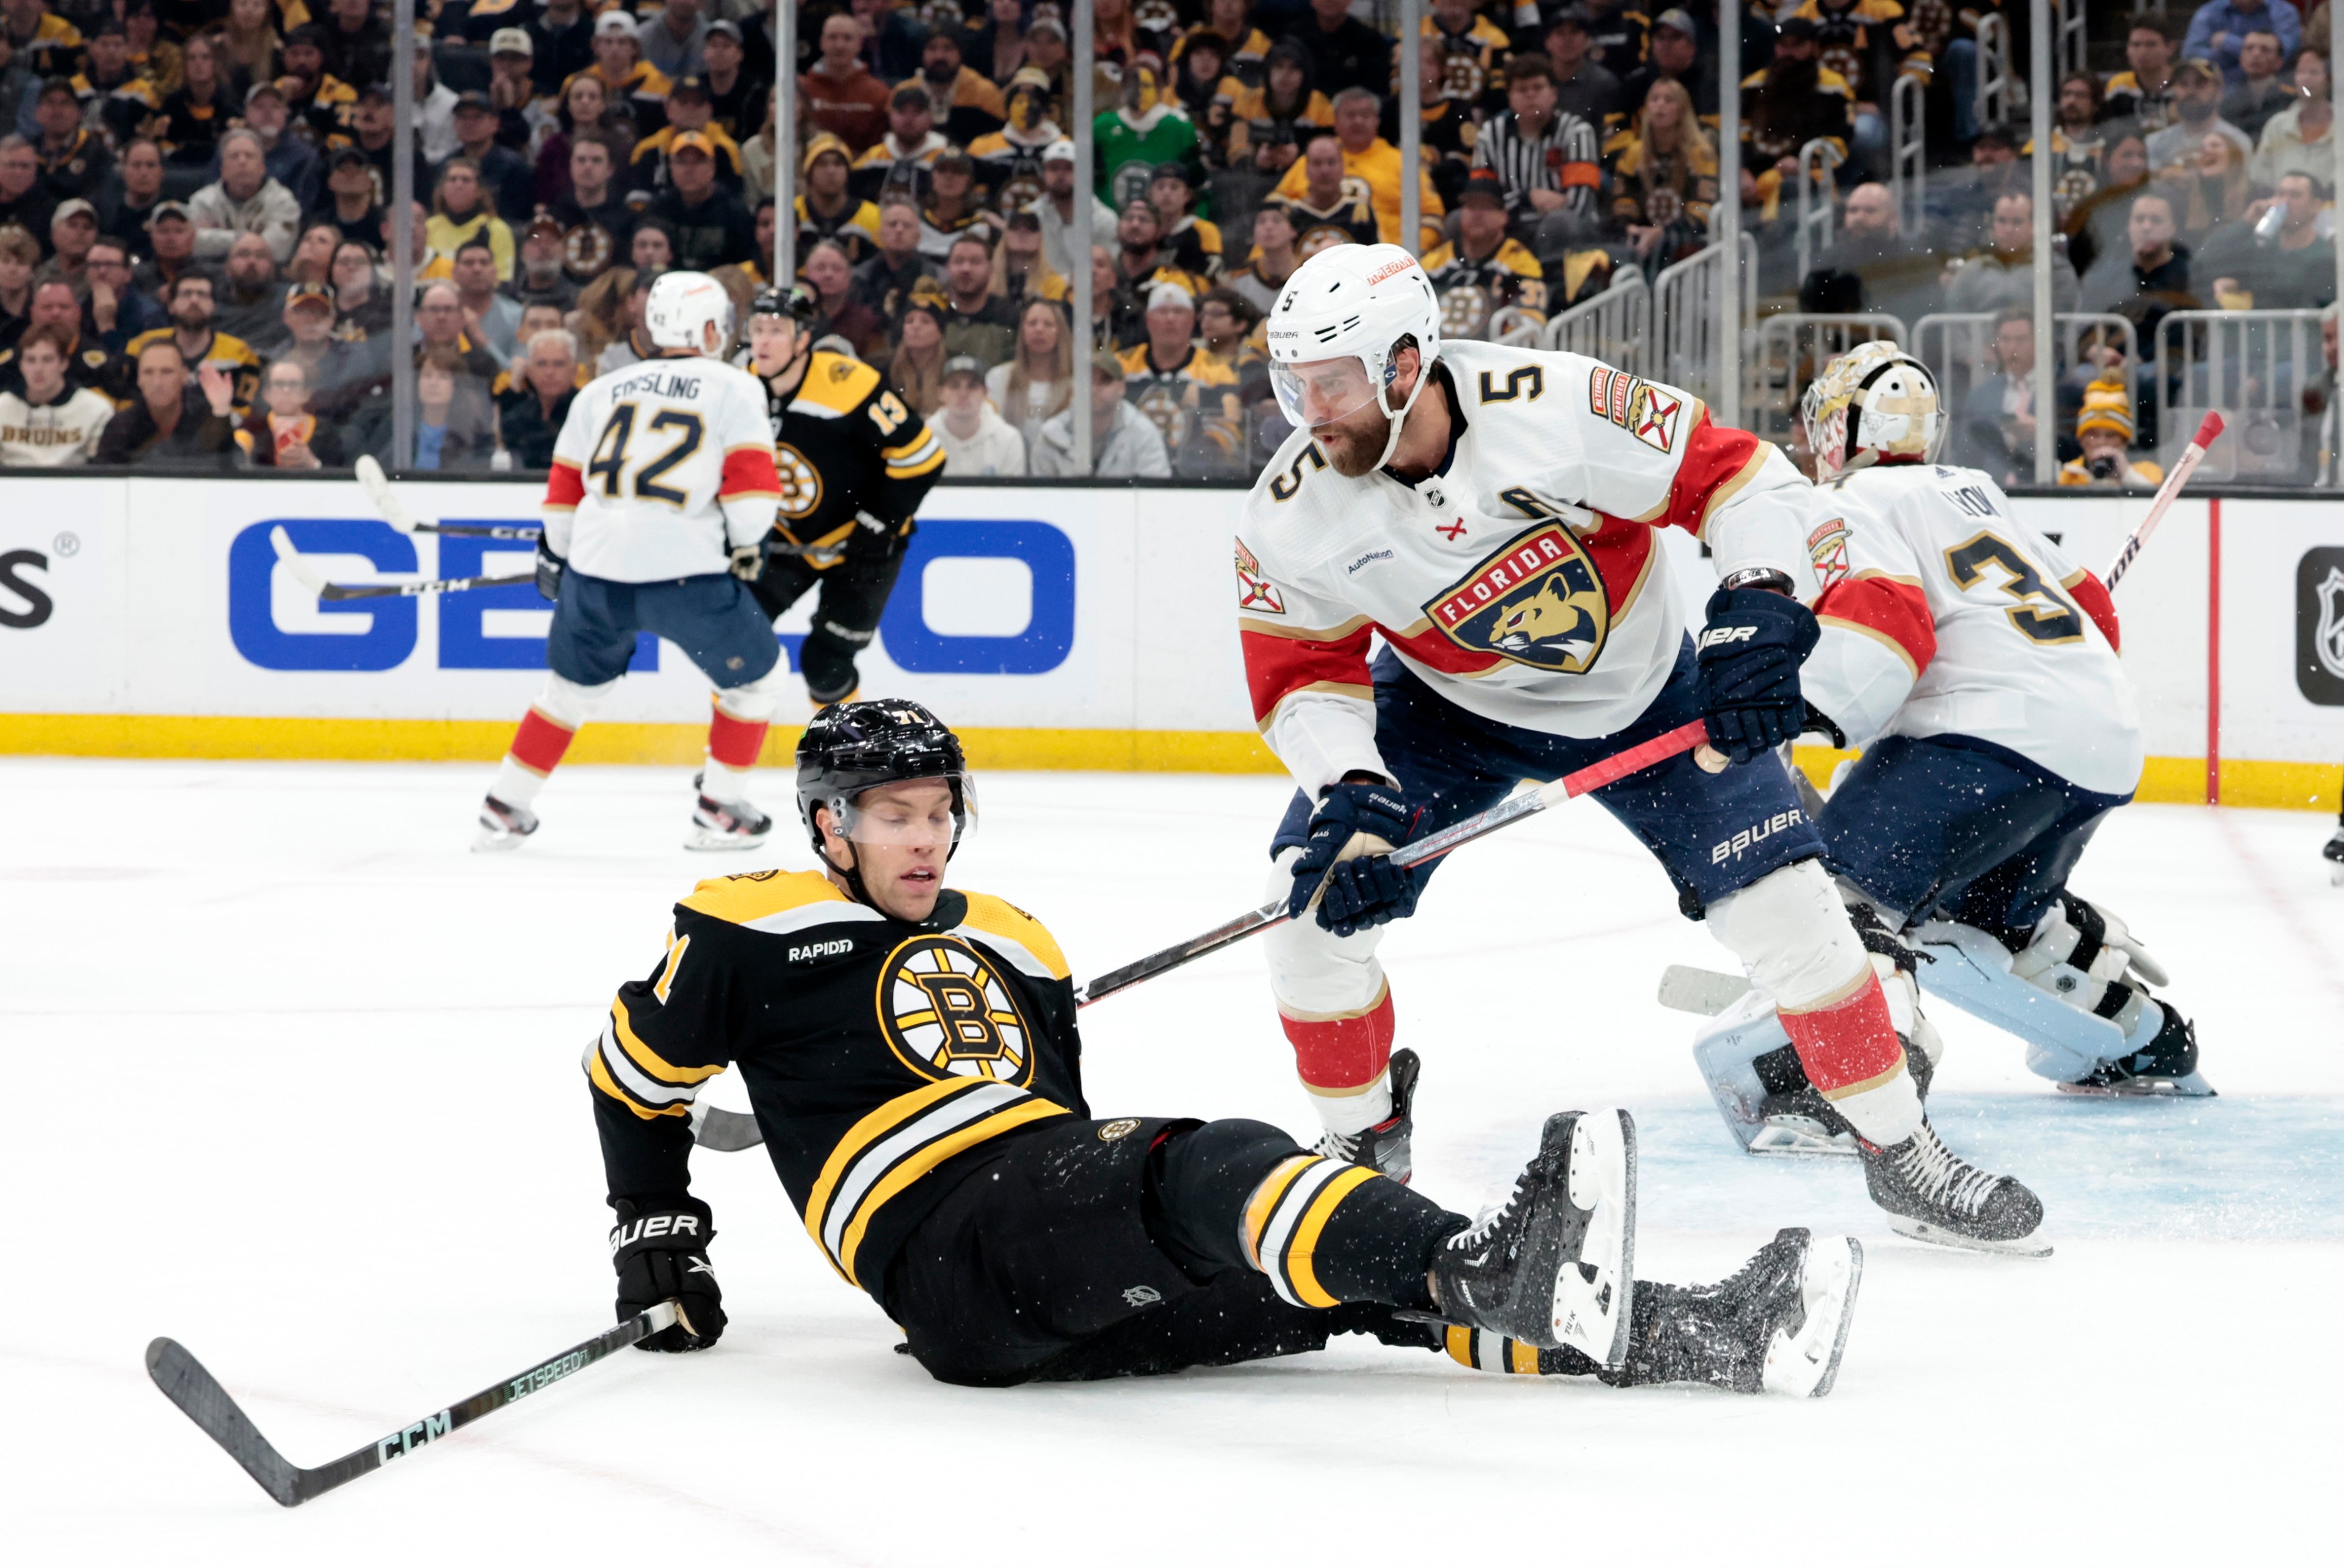 Florida Panthers defenseman Aaron Ekblad (5) dumps Boston Bruins left wing Taylor Hall (71) during Game 2 of an Eastern Conference First Round playoff contest between the Boston Bruins and the Florida Panthers on April 19, 2023, at TD Garden in Boston, Massachusetts.